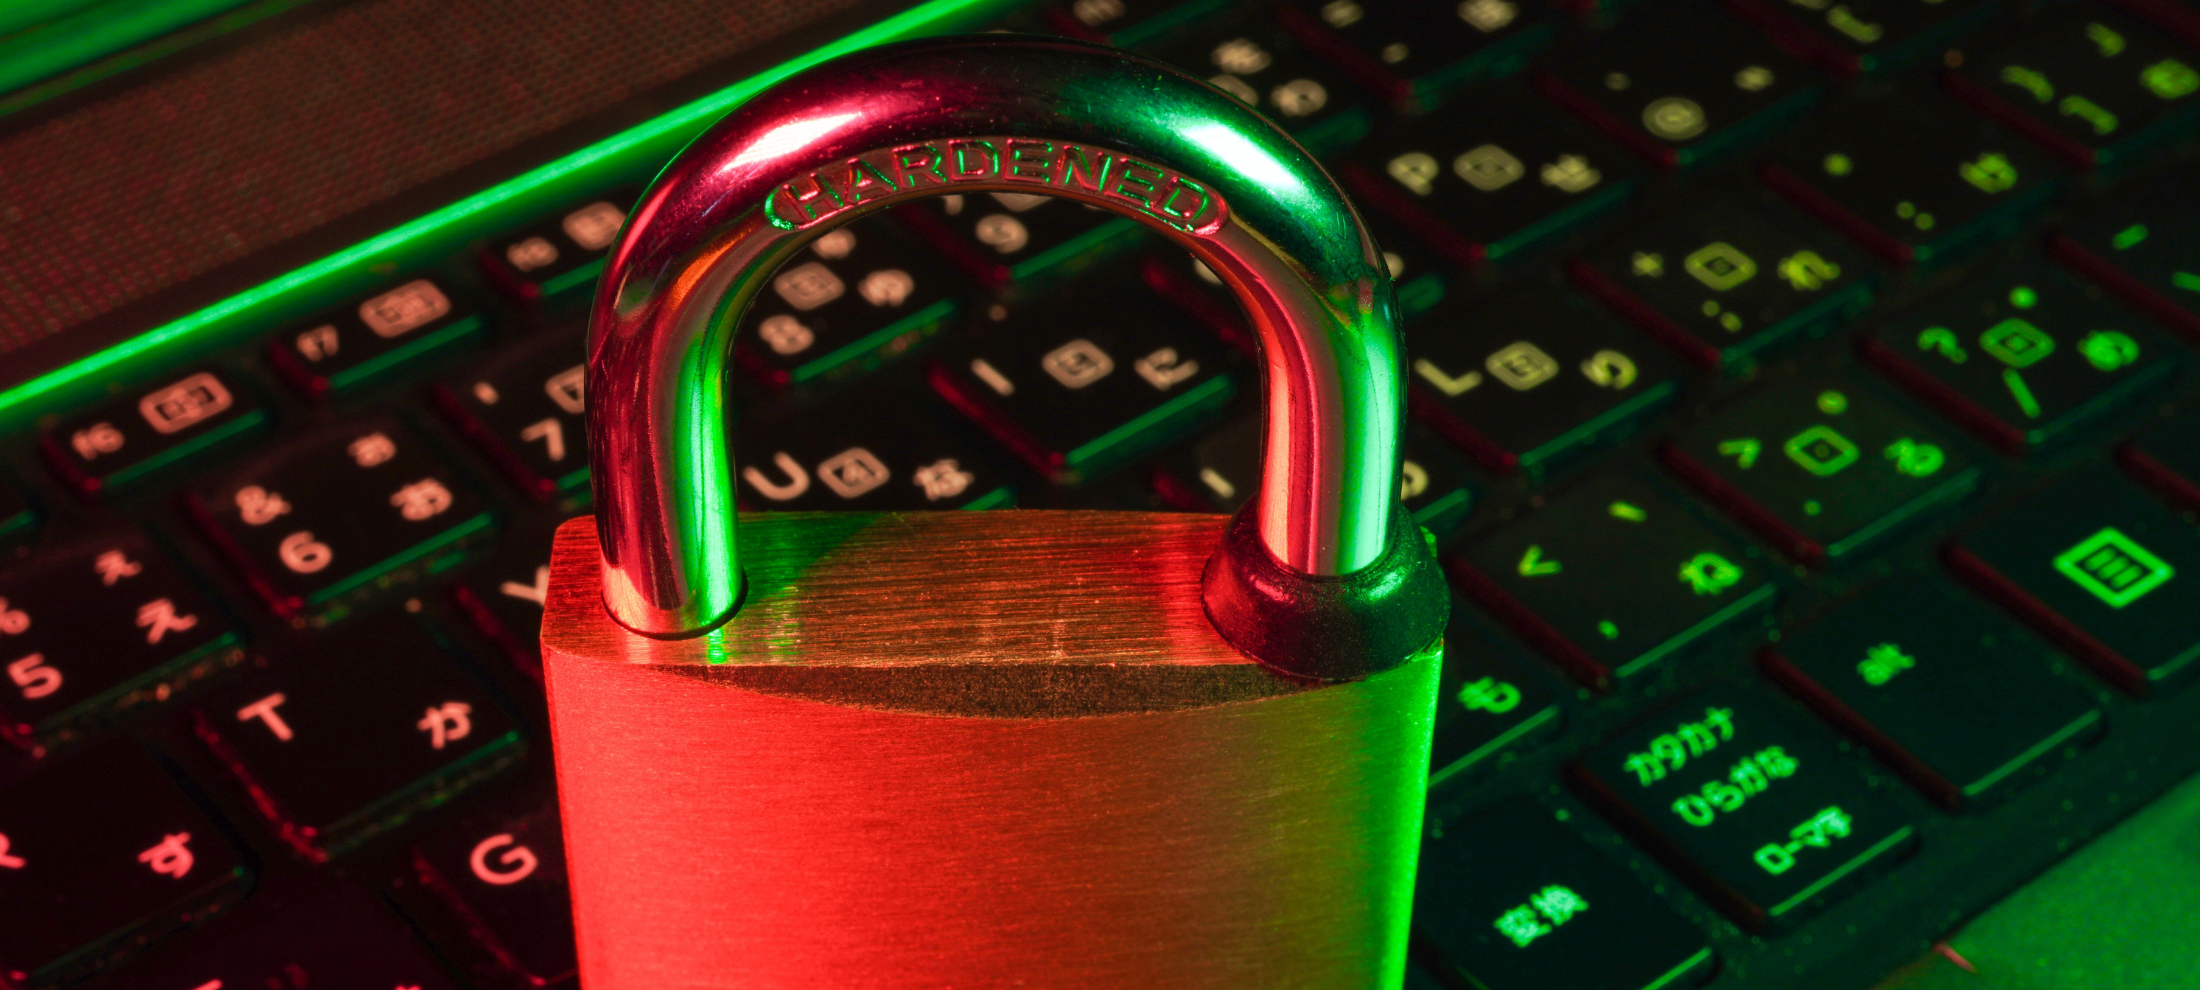 Key Security Measures for Your HR Database to Protect Employee Data